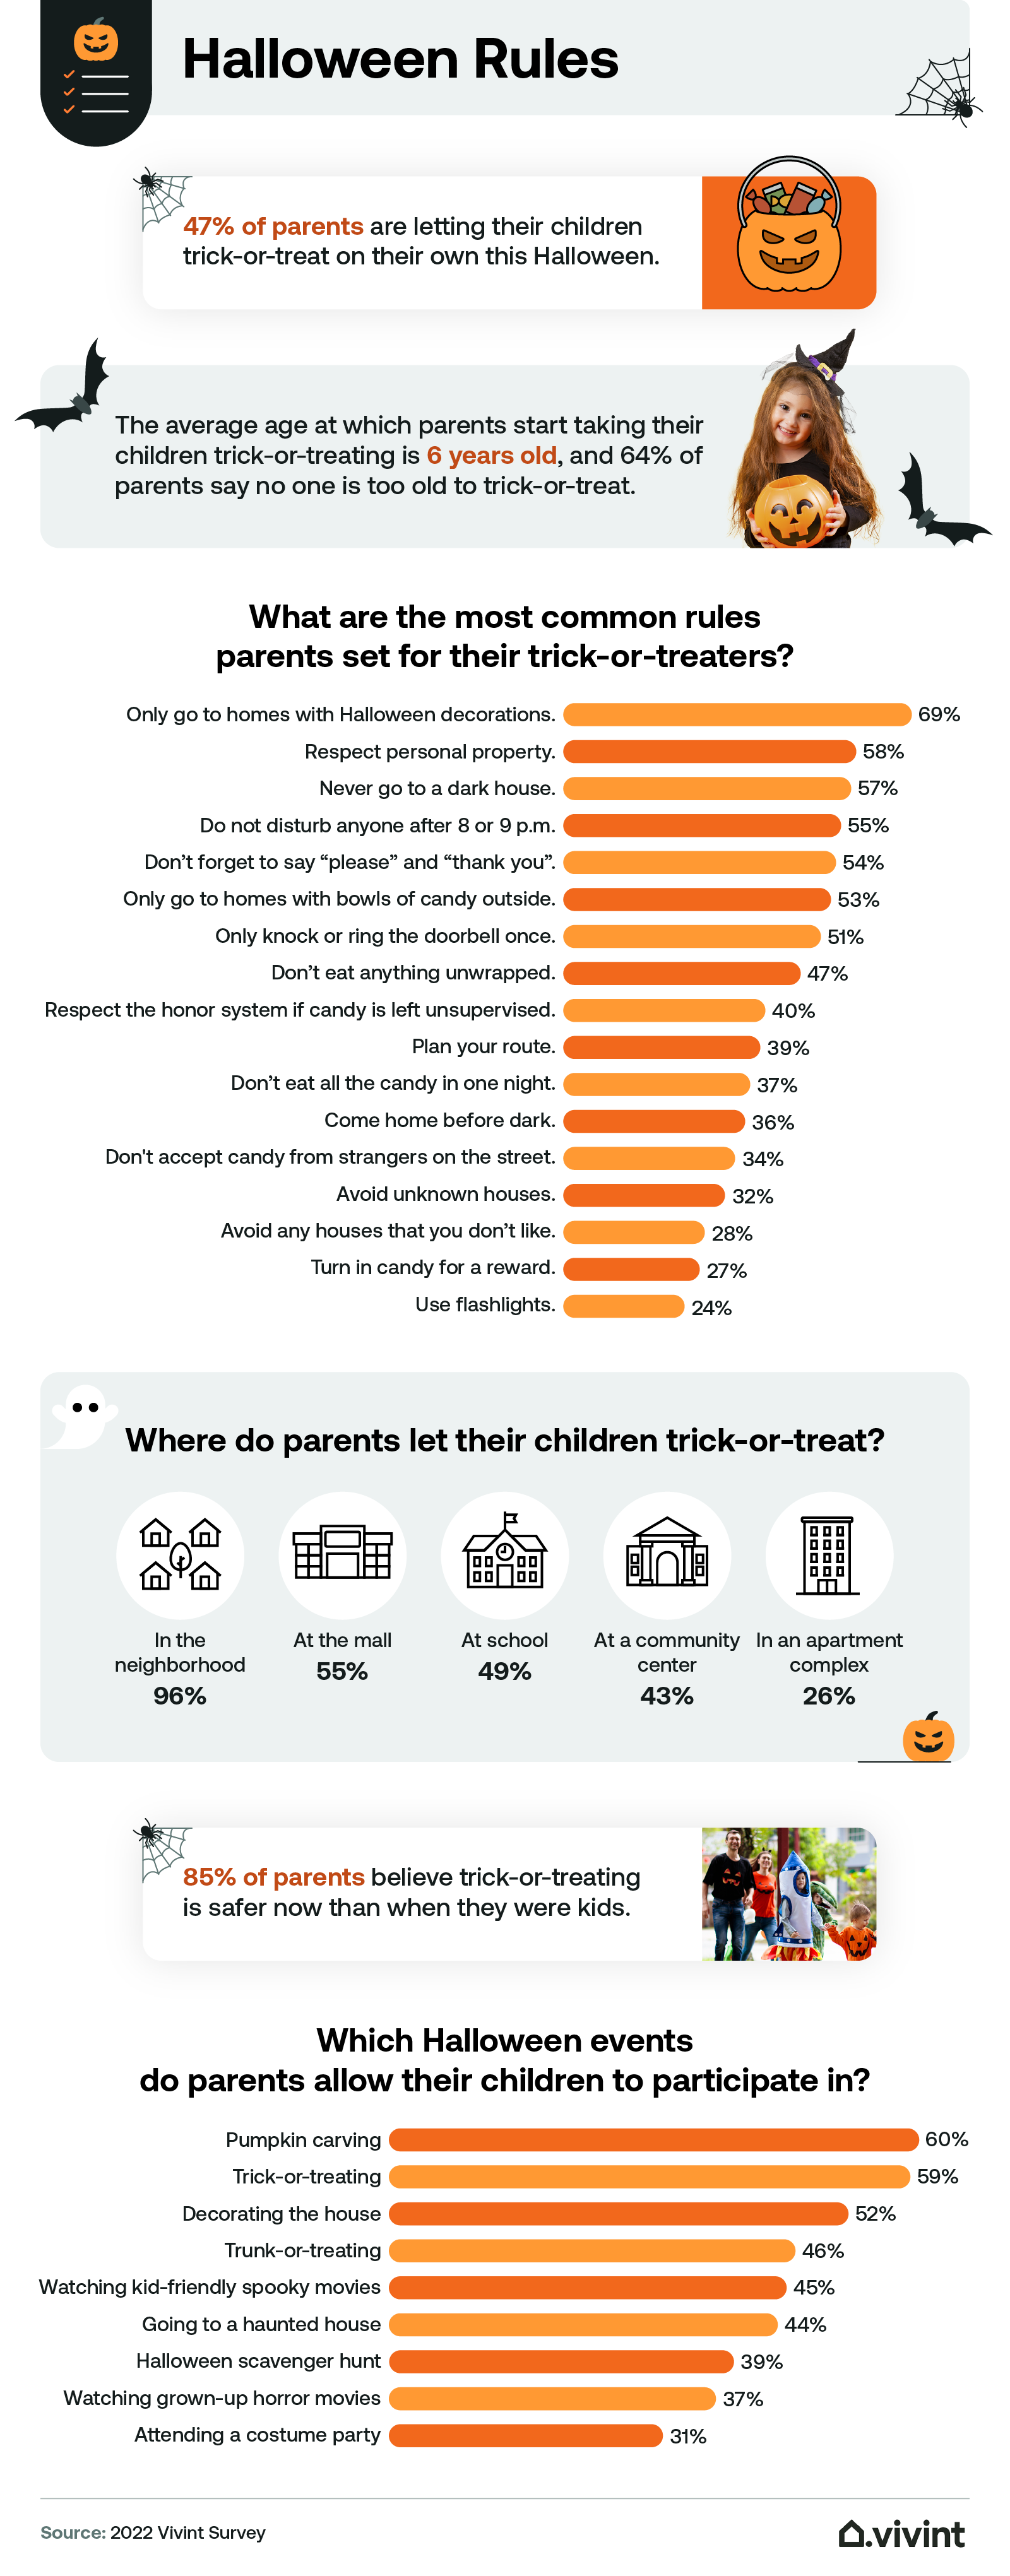 Information about what rules parents have for their children on Halloween.